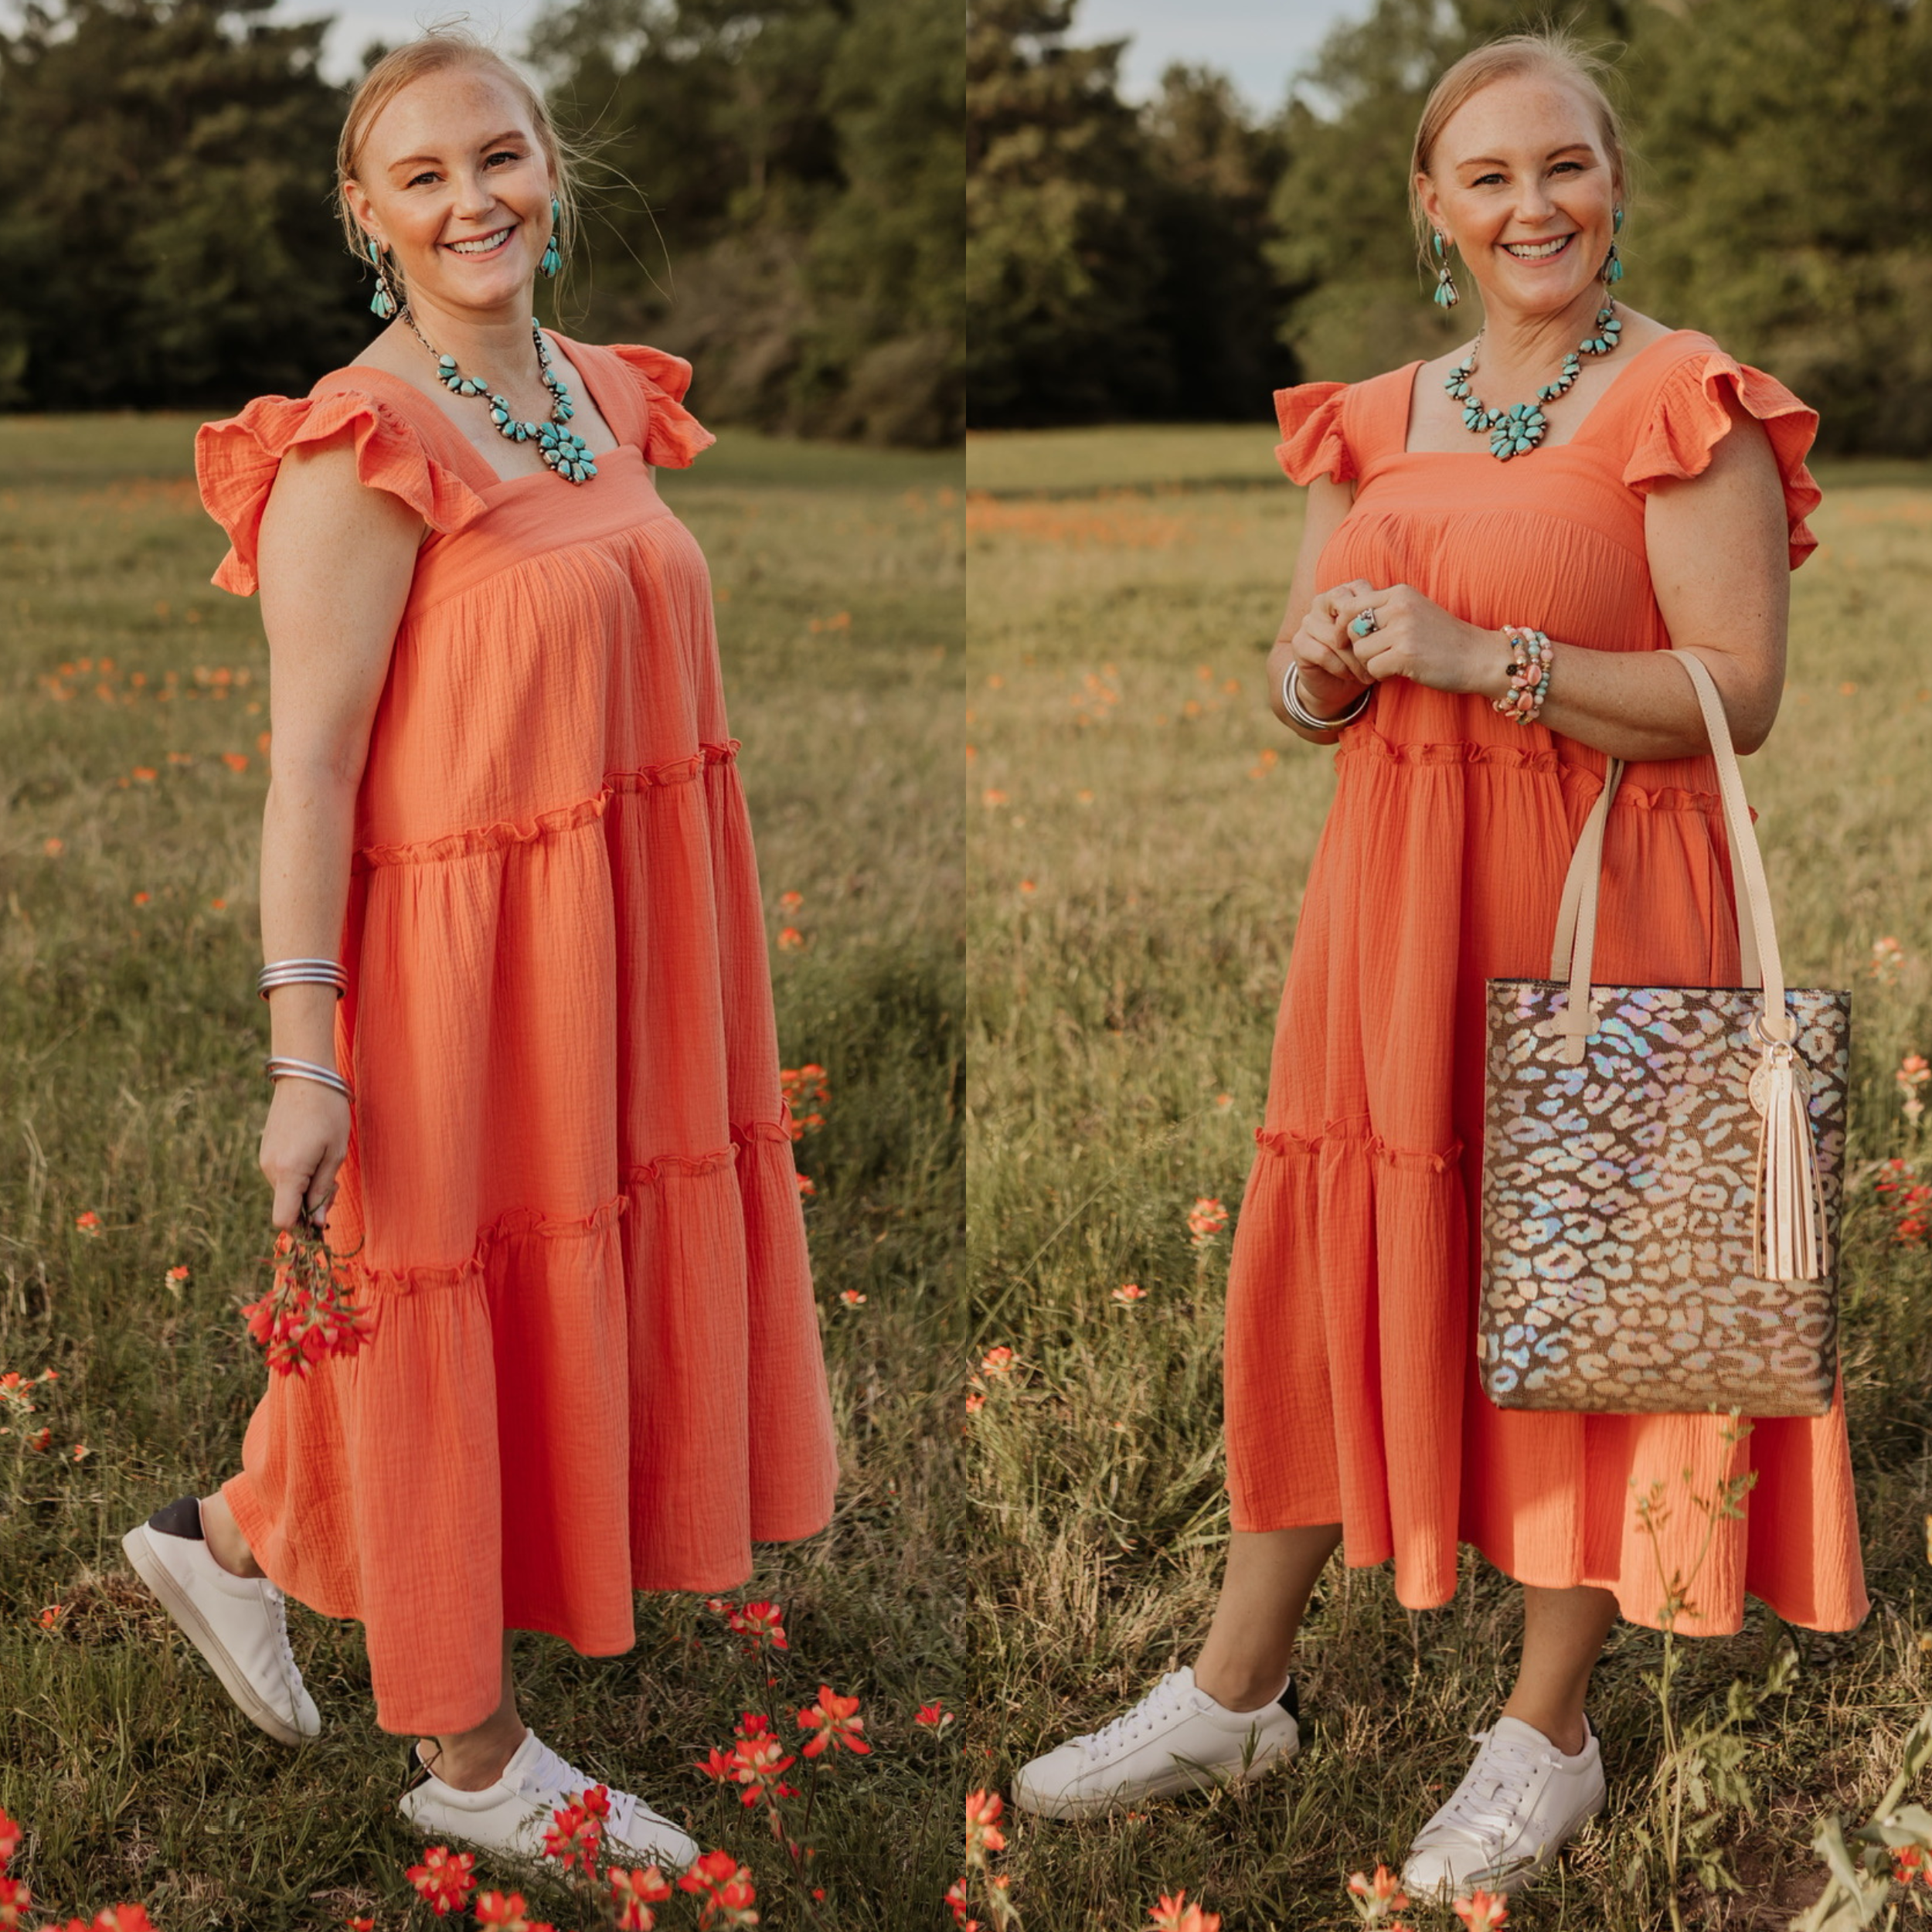 Model is wearing an orange tiered dress with ruffle straps. Model has it paired with white sneakers, a leopard print purse, and turquoise jewelry.